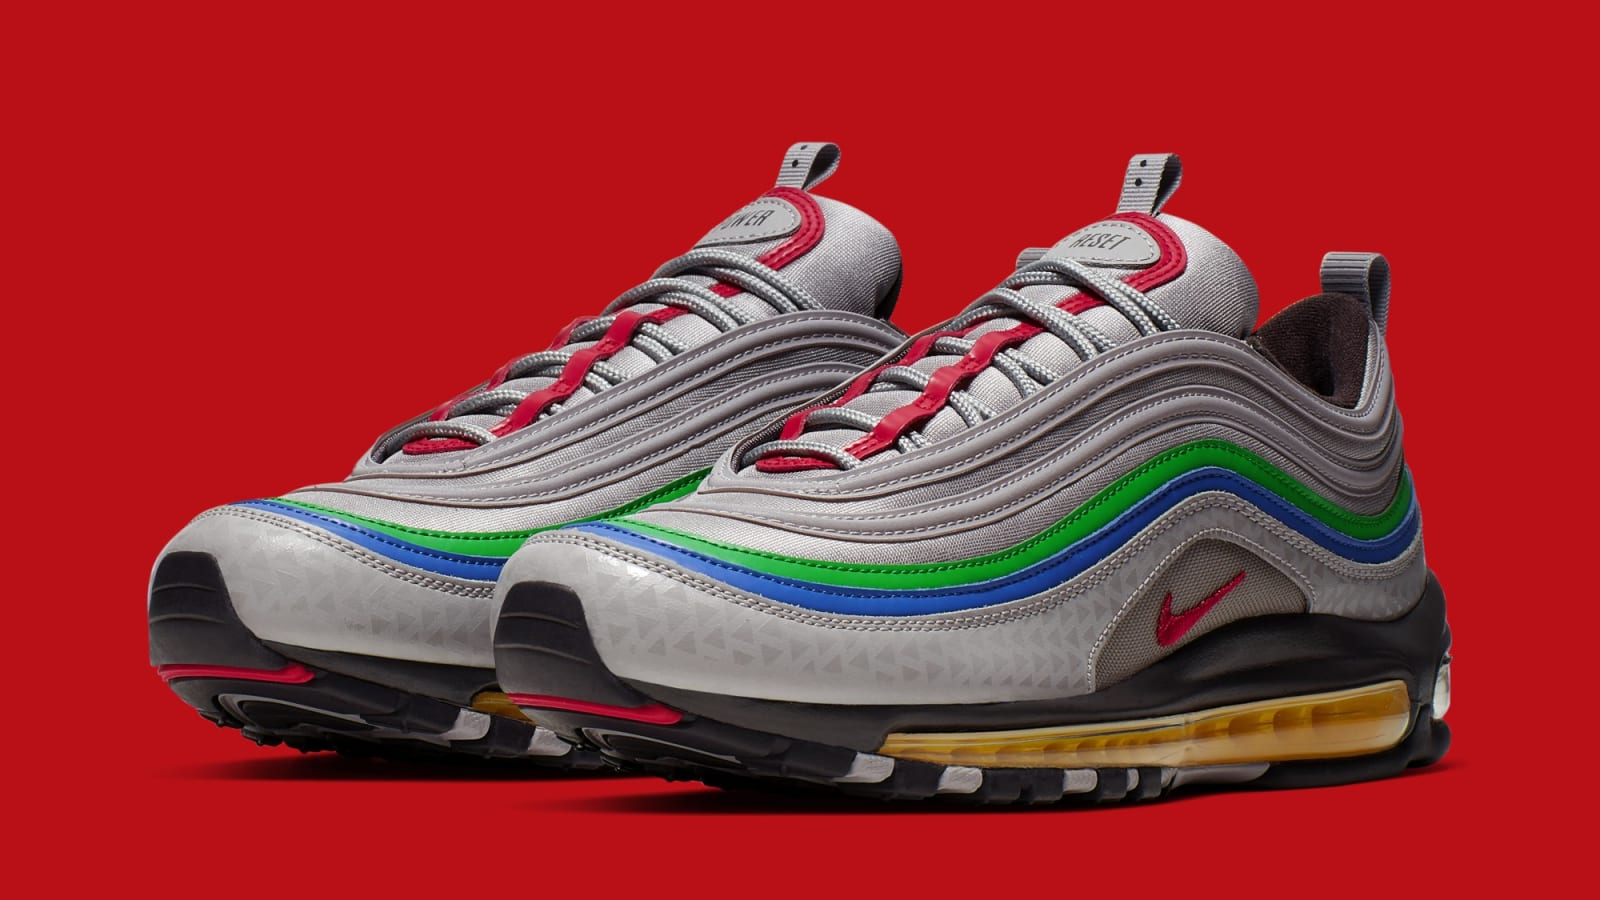 Nike Air Max 97 &quot;Nintendo 64&quot; Release Date Revealed: Official Images